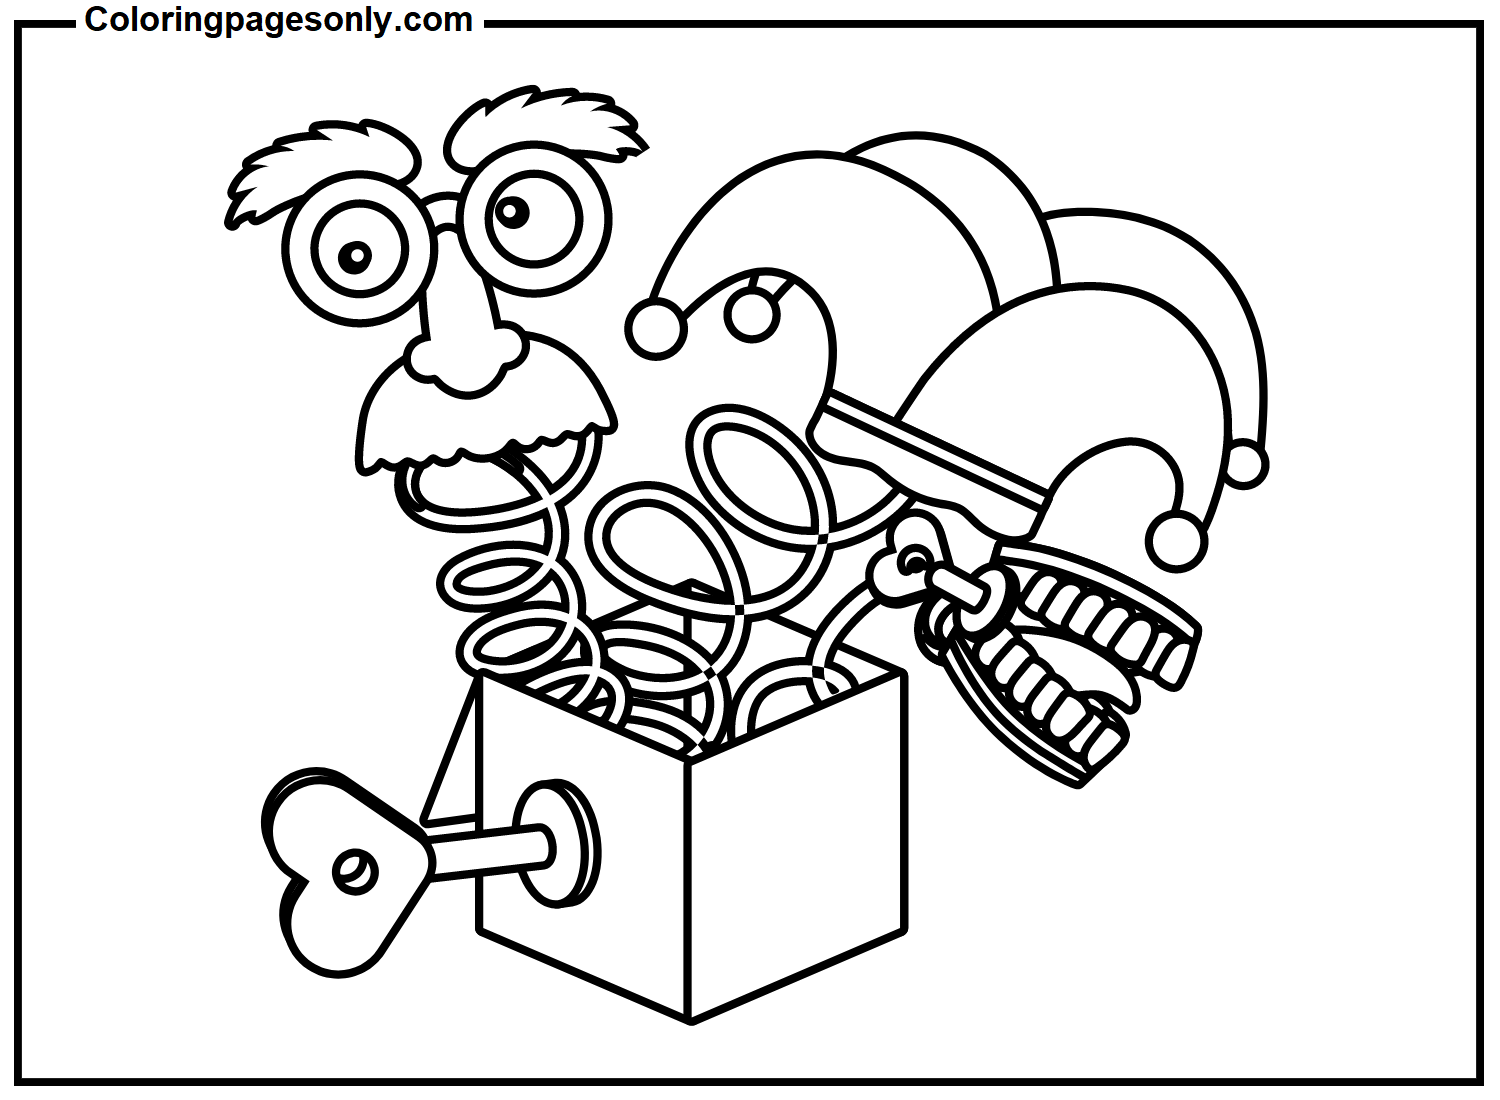 April Fools' Day For Kids Coloring Pages